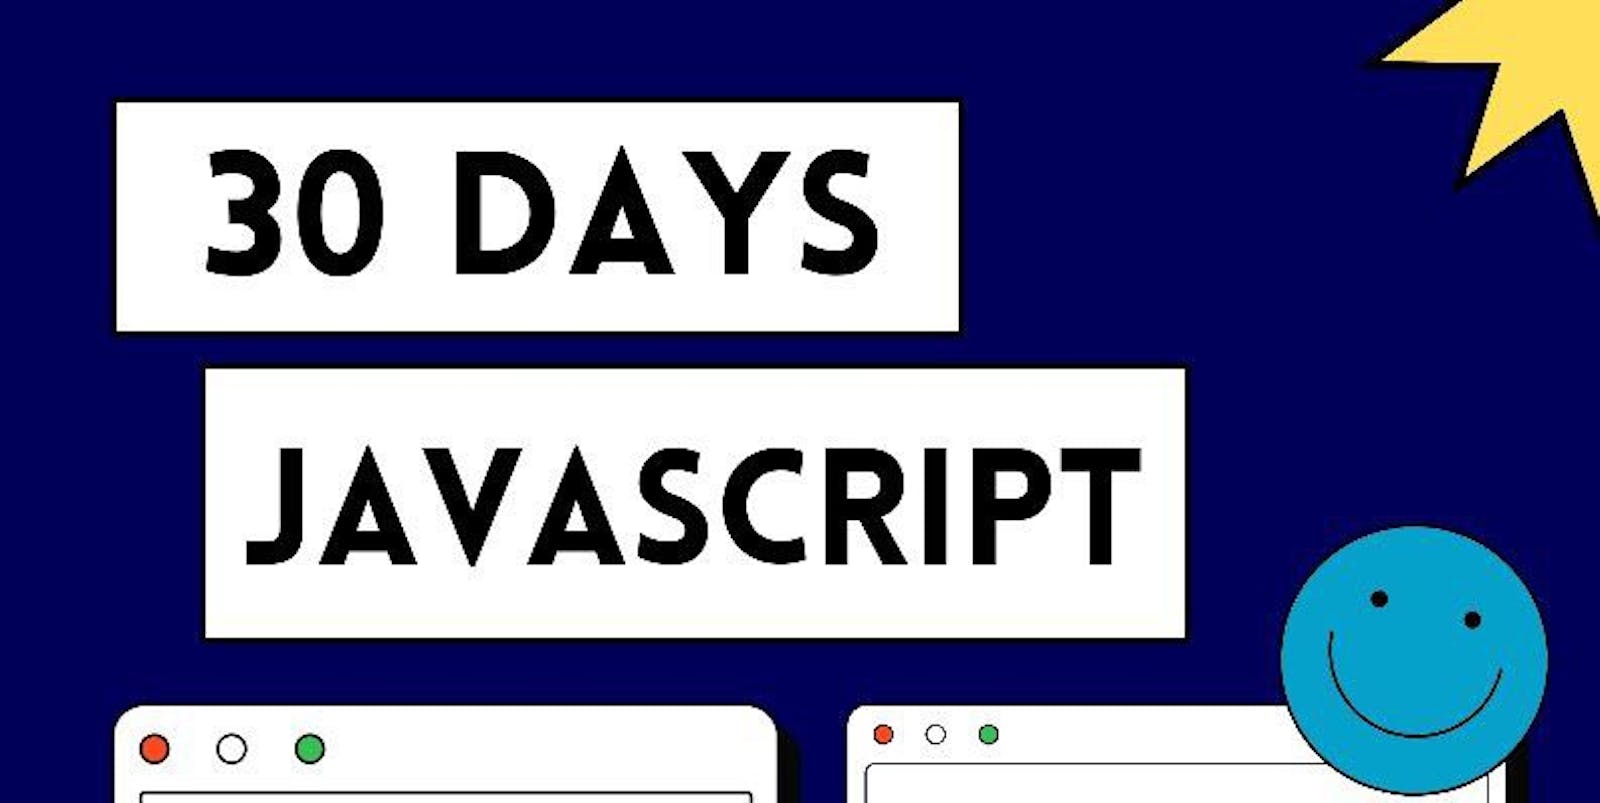 Day 2 | Day 3 of 30 Days Javascript